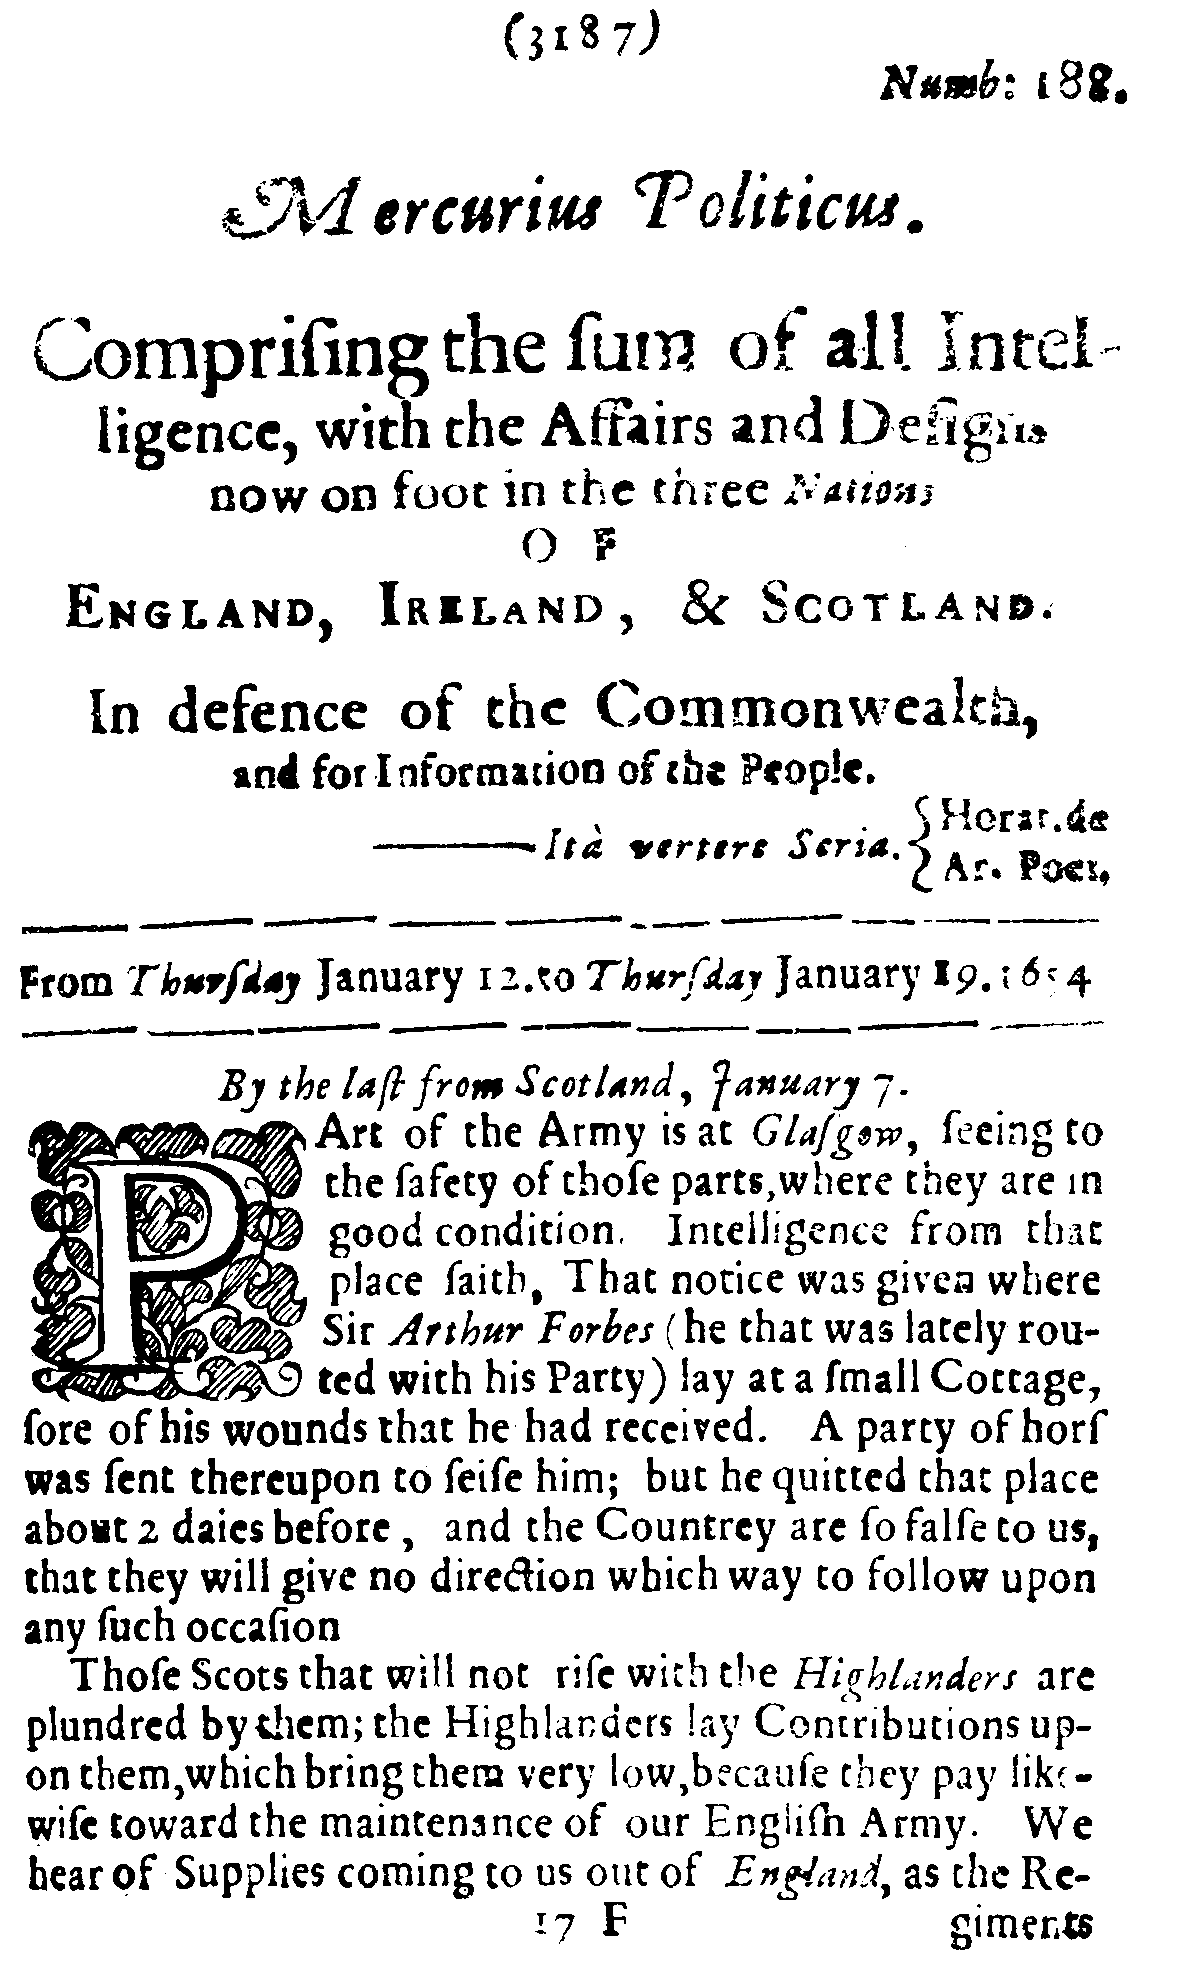 Mercurius Politicus, Issue 188, graphical scan for page 1